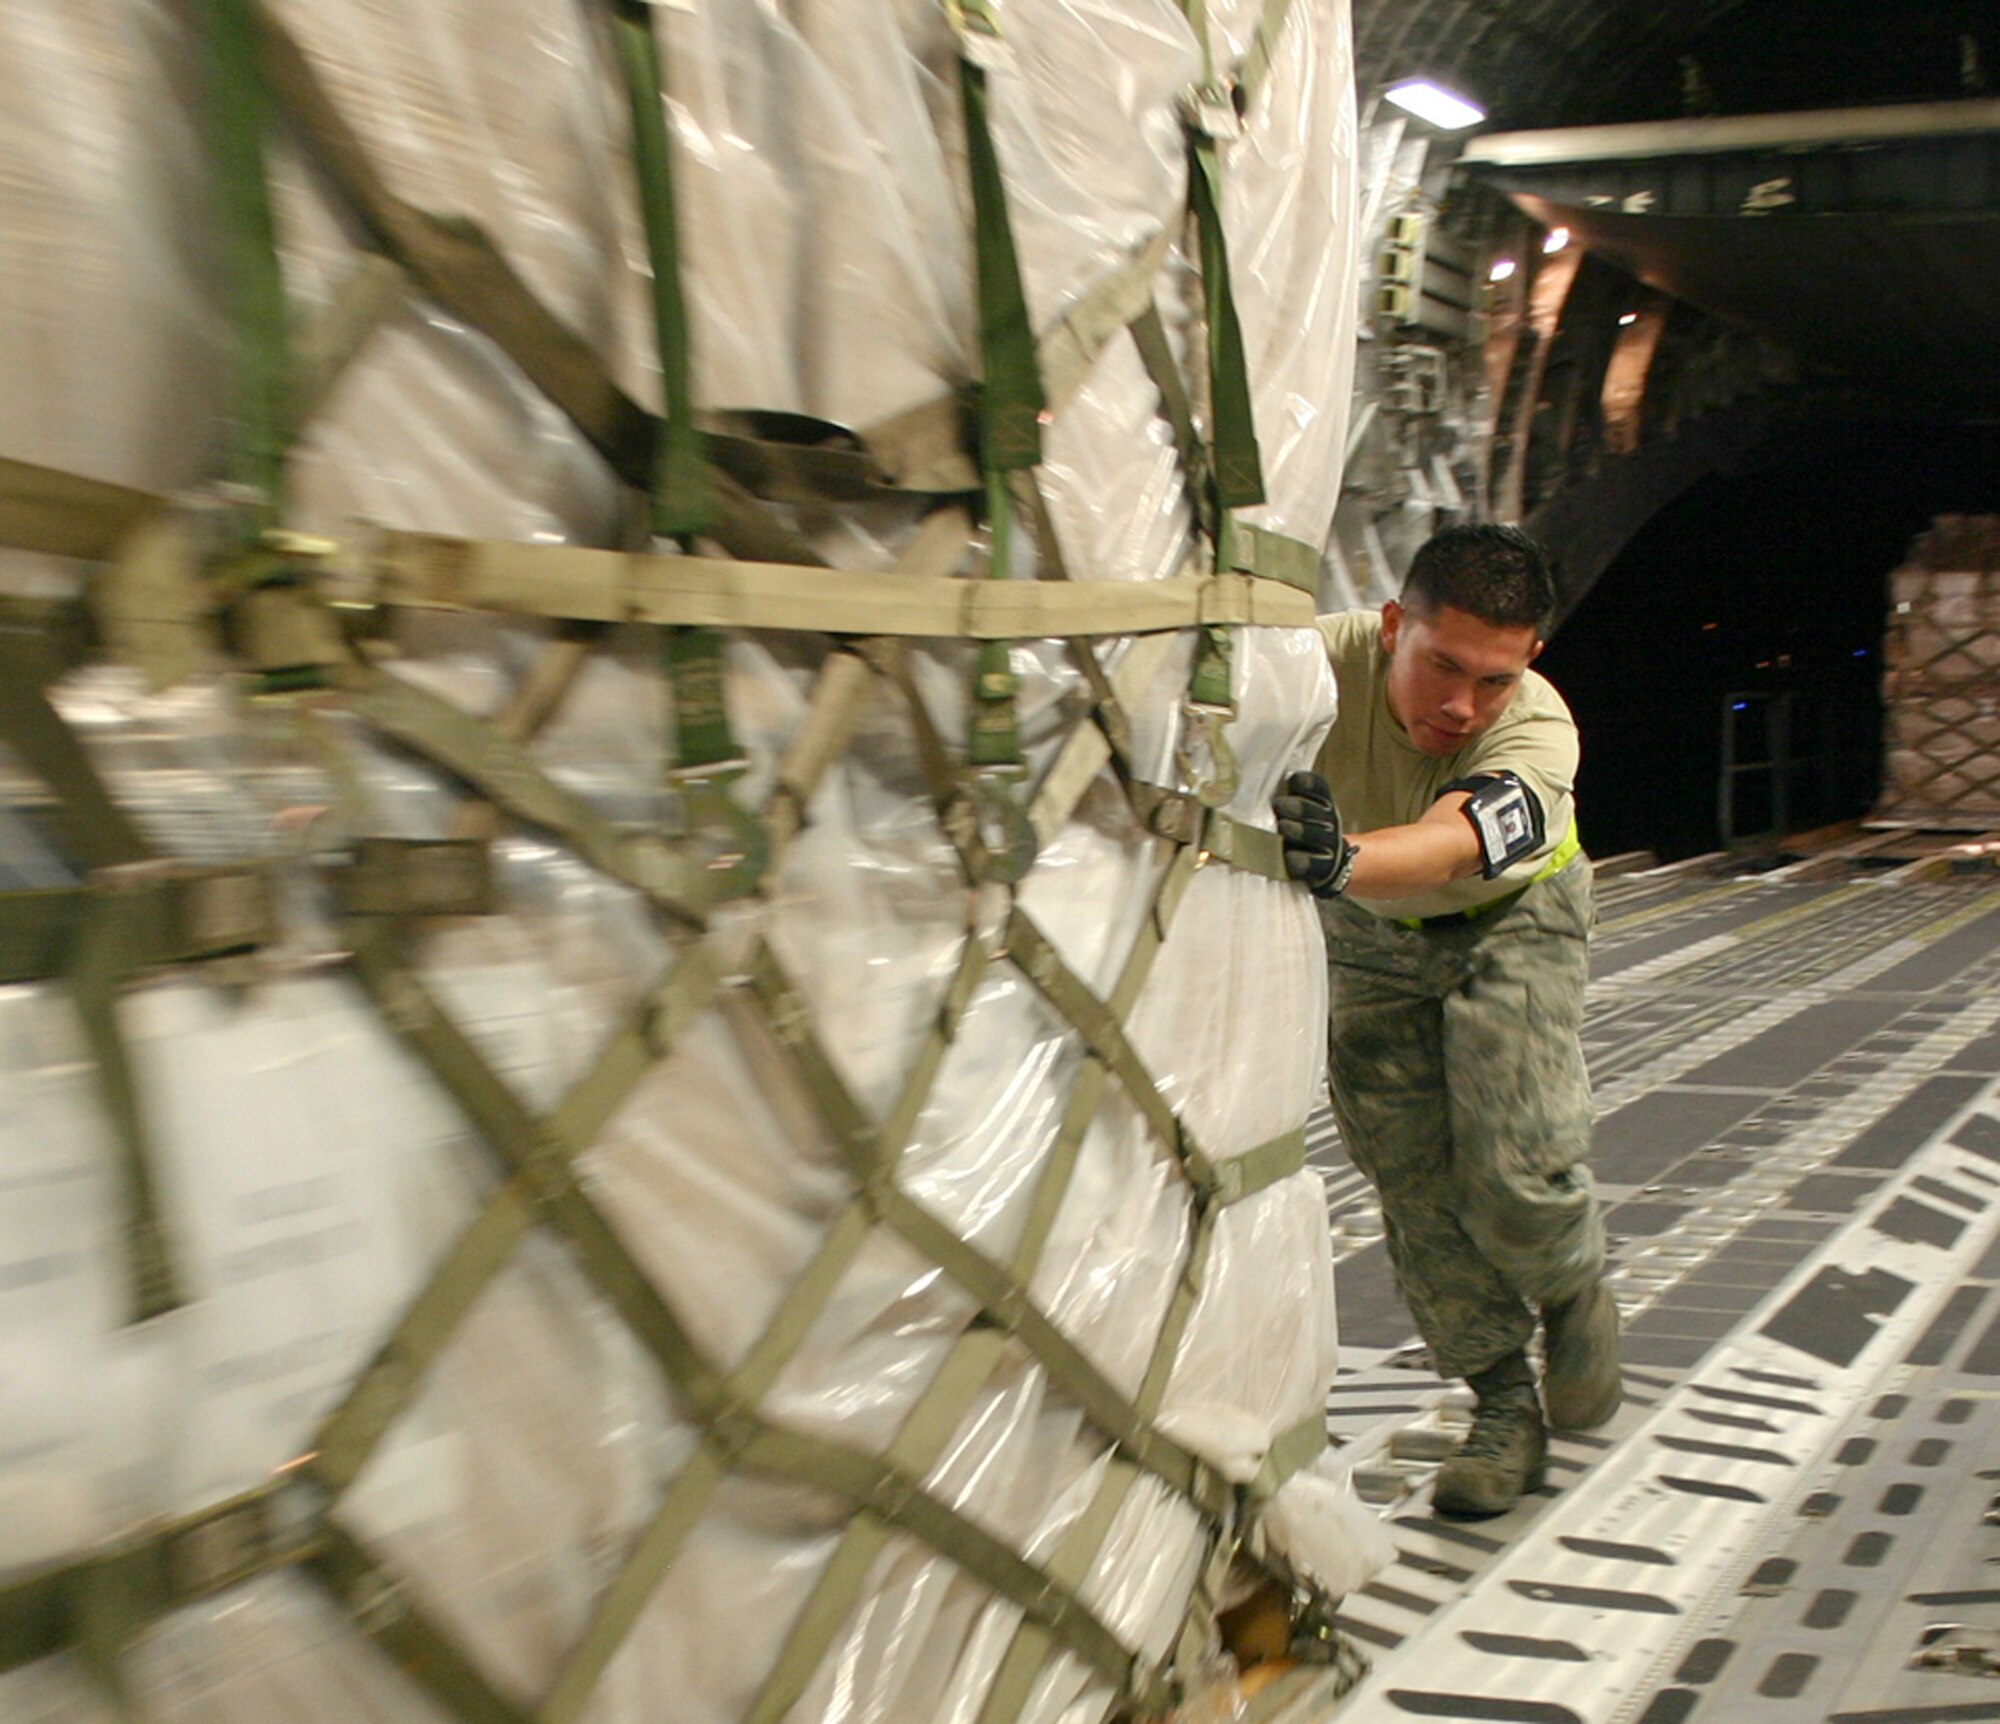 Airmen airdrop relief supplies to Haitians > Air Force > Article Display